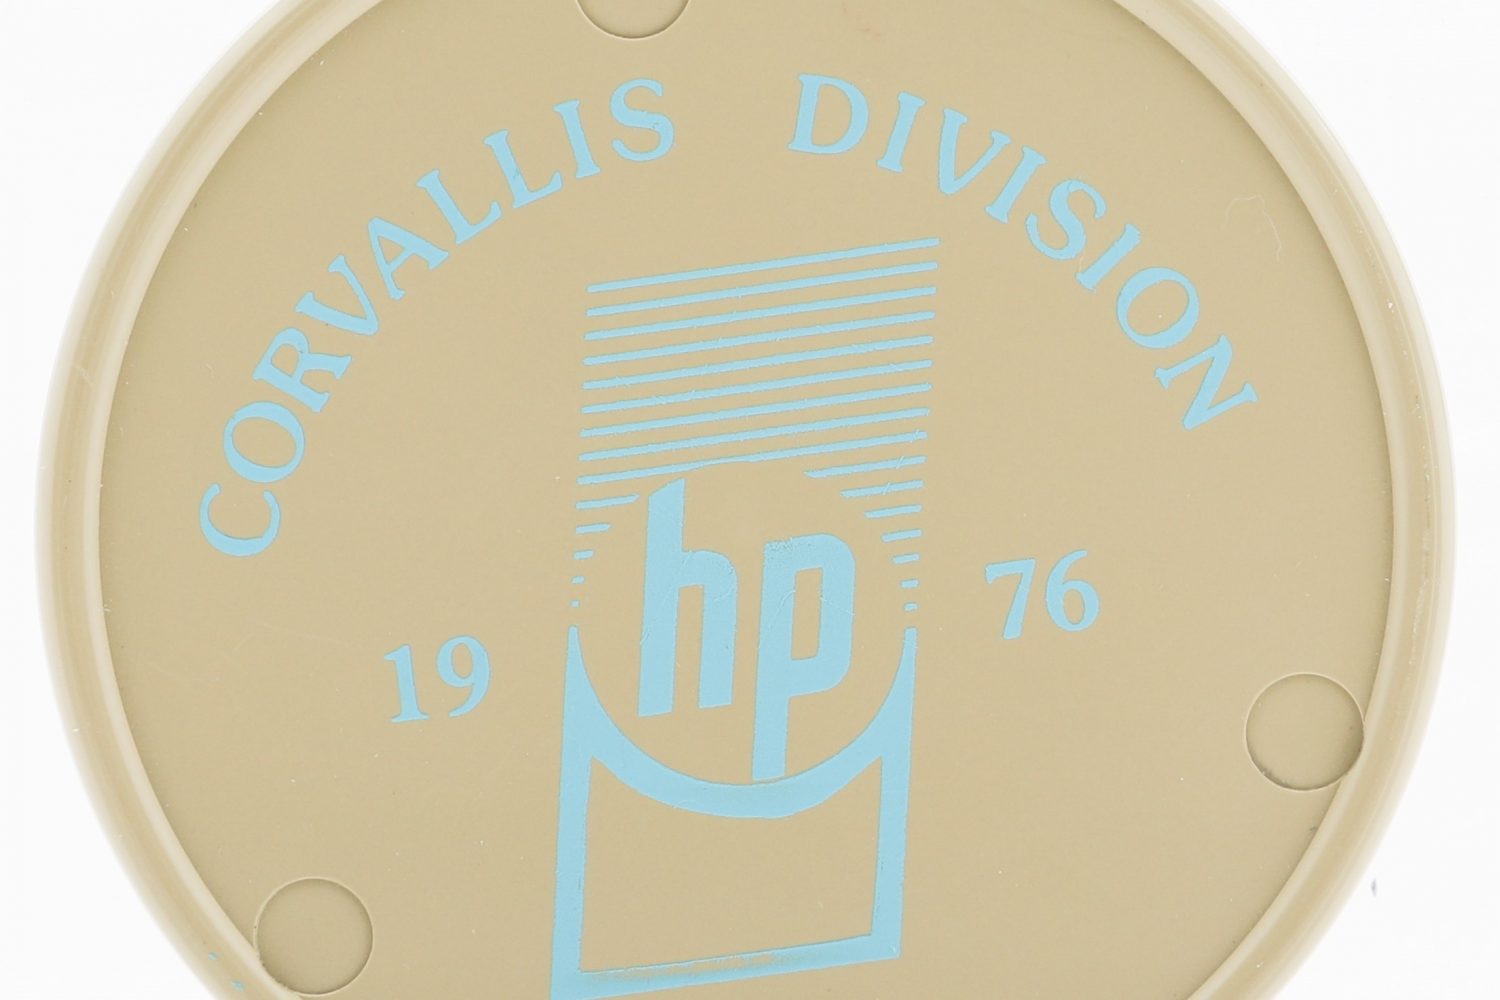 A coaster celebrating the opening of Hewlett-Packard's Corvallis facility in 1976.